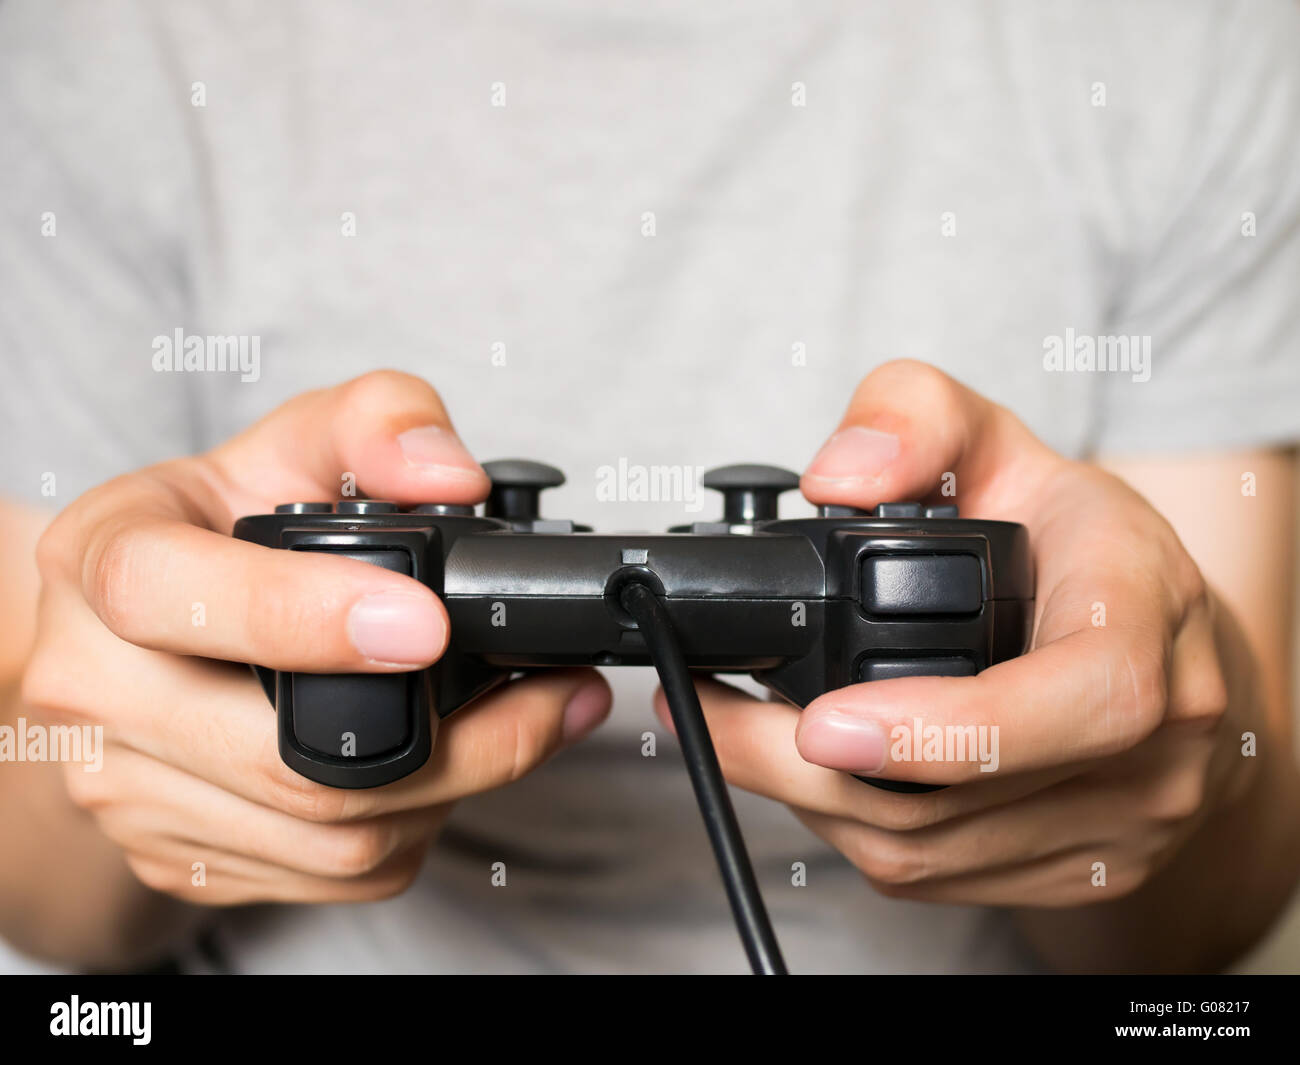 A young man holding game controller playing video games Stock Photo - Alamy